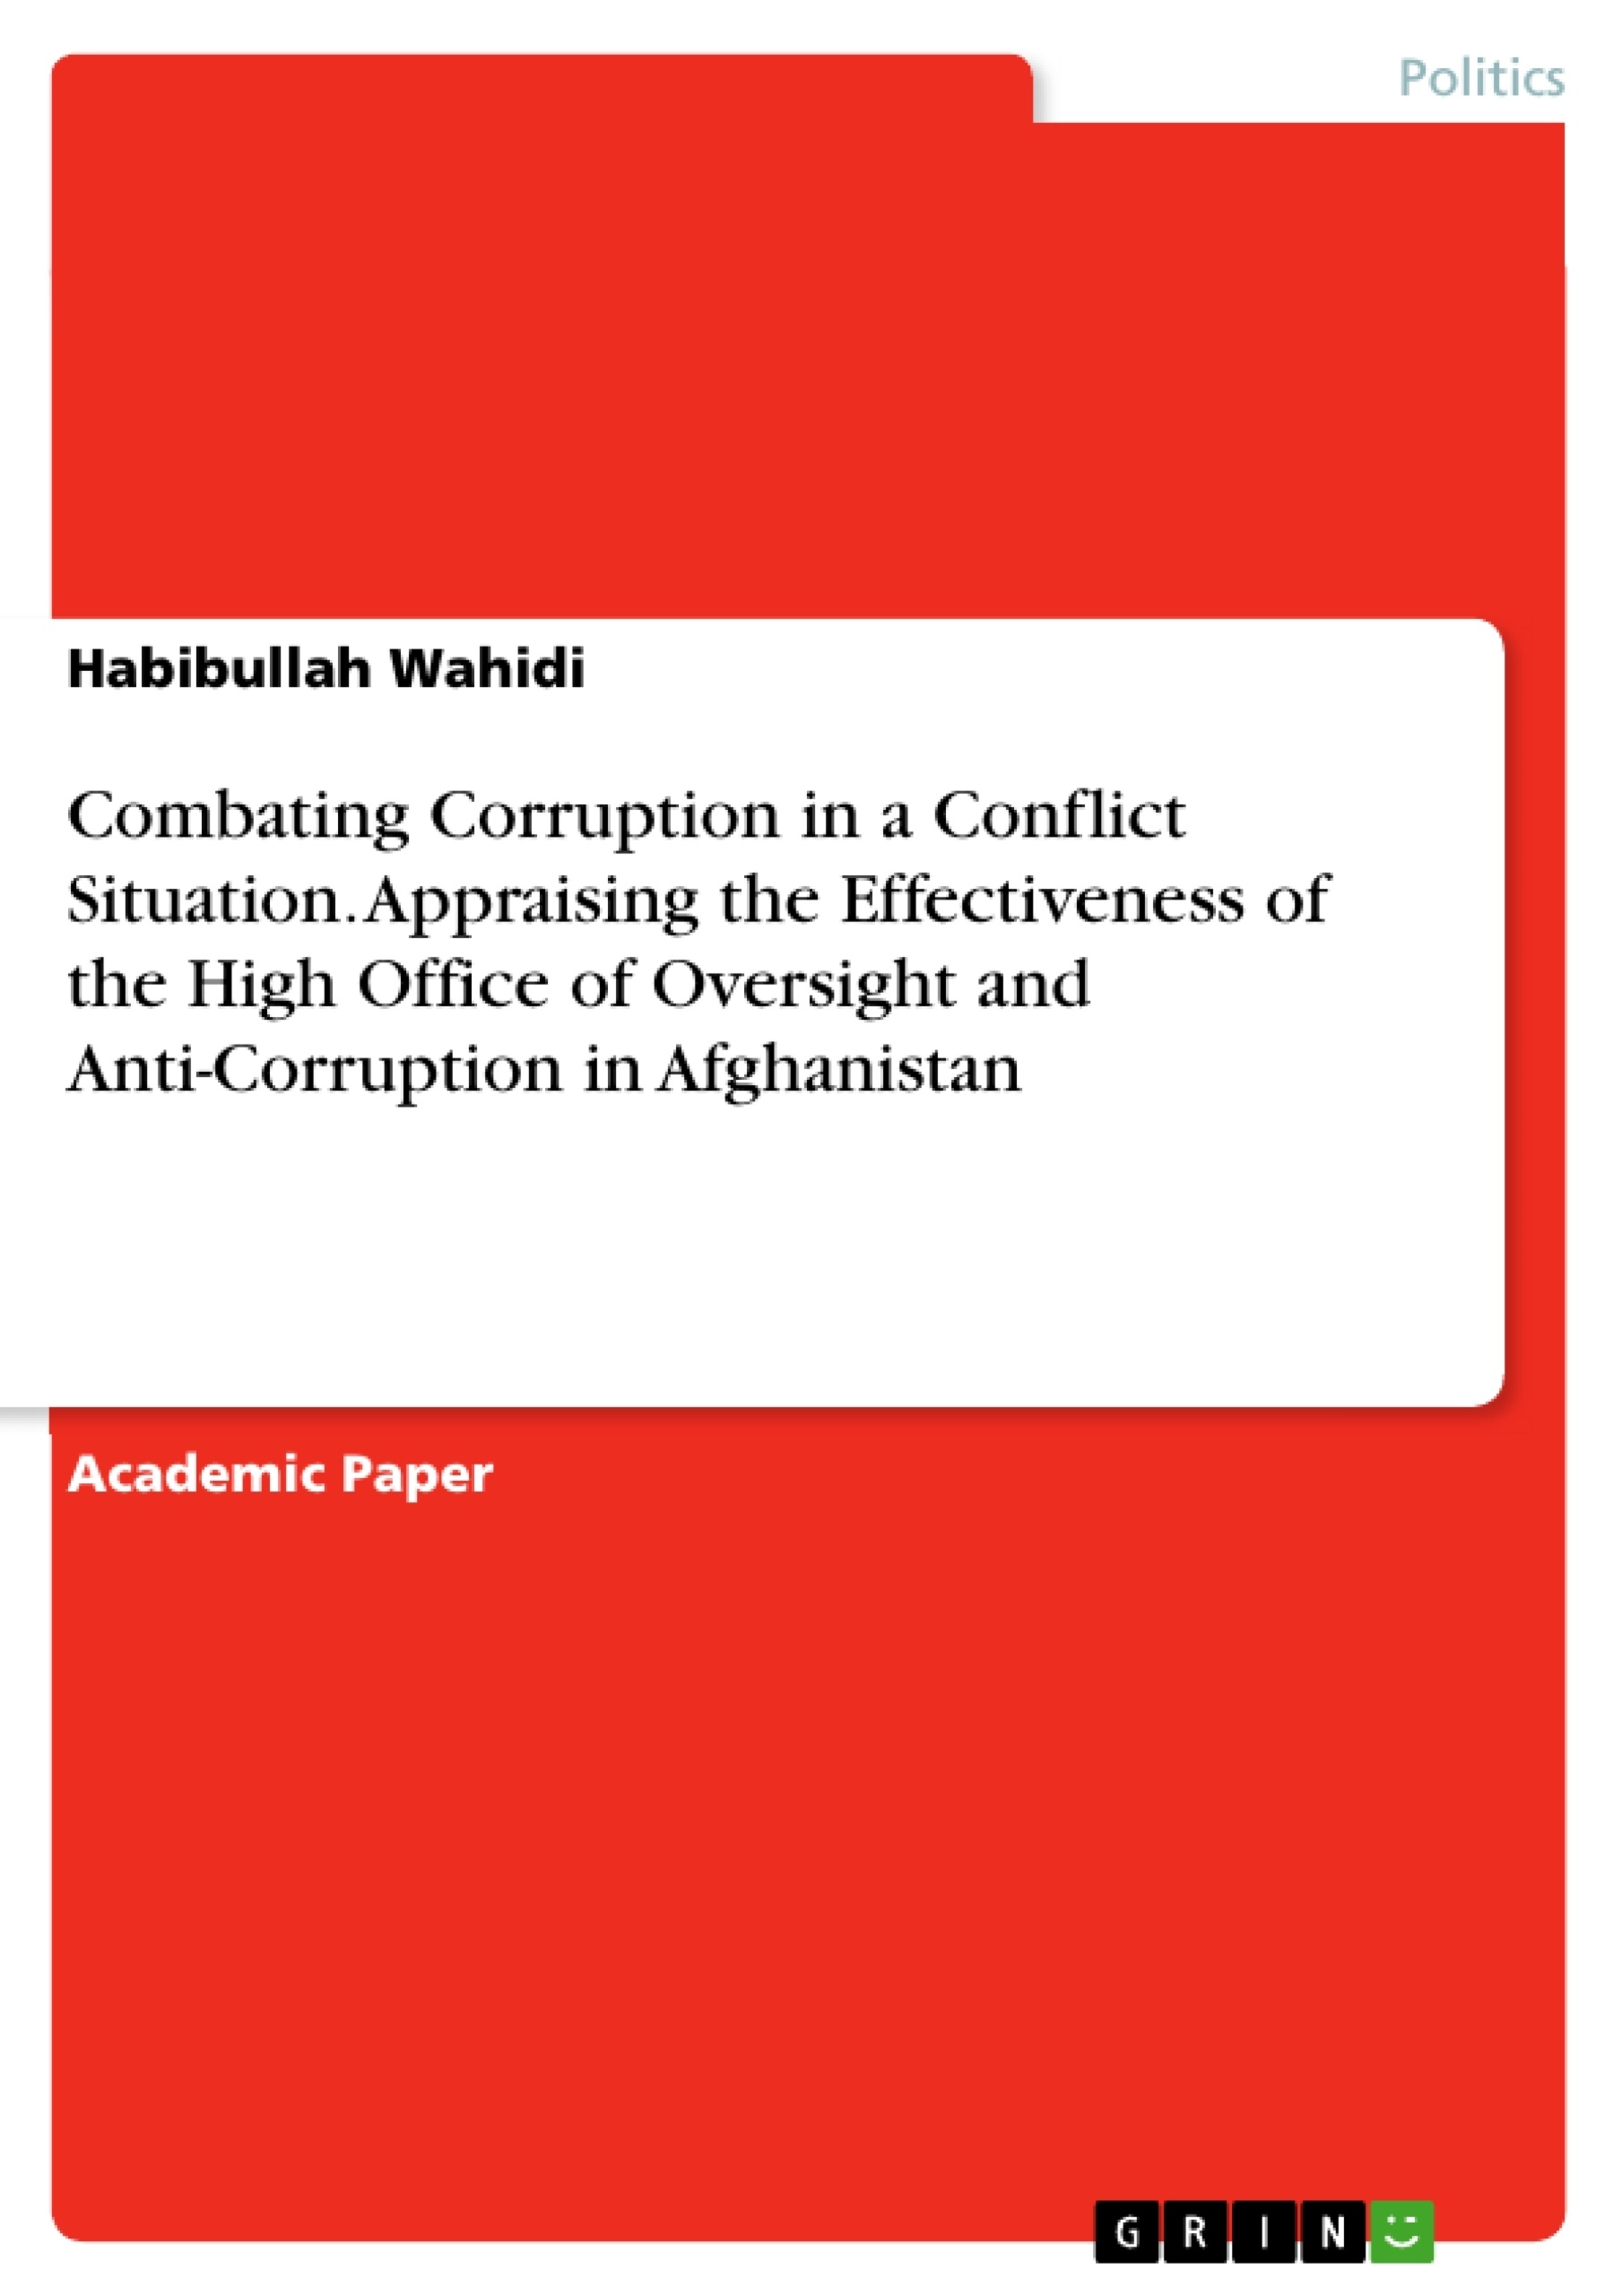 Title: Combating Corruption in a Conflict Situation. Appraising the Effectiveness of the High Office of Oversight and Anti-Corruption in Afghanistan